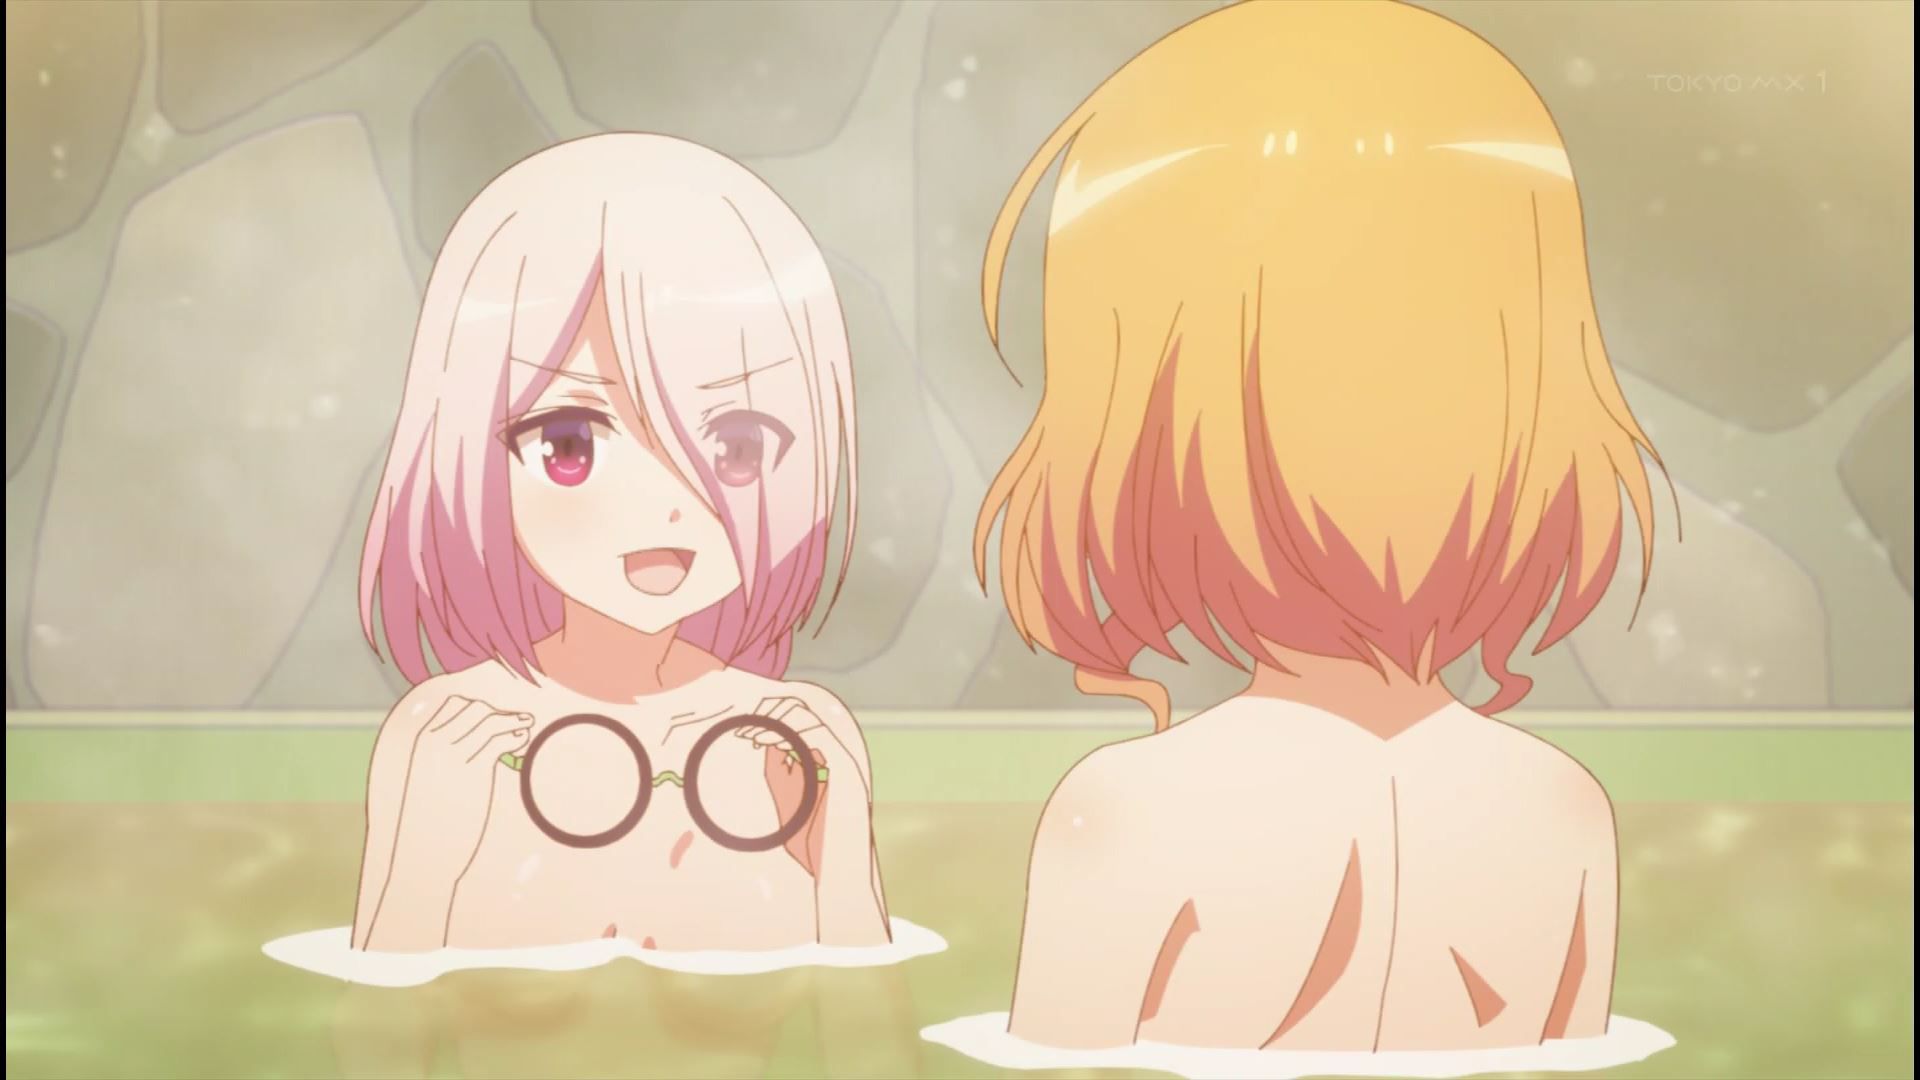 Erotic breasts and naked figure in erotic bathing scene of girls in the anime [Music girl] 2 story! 3